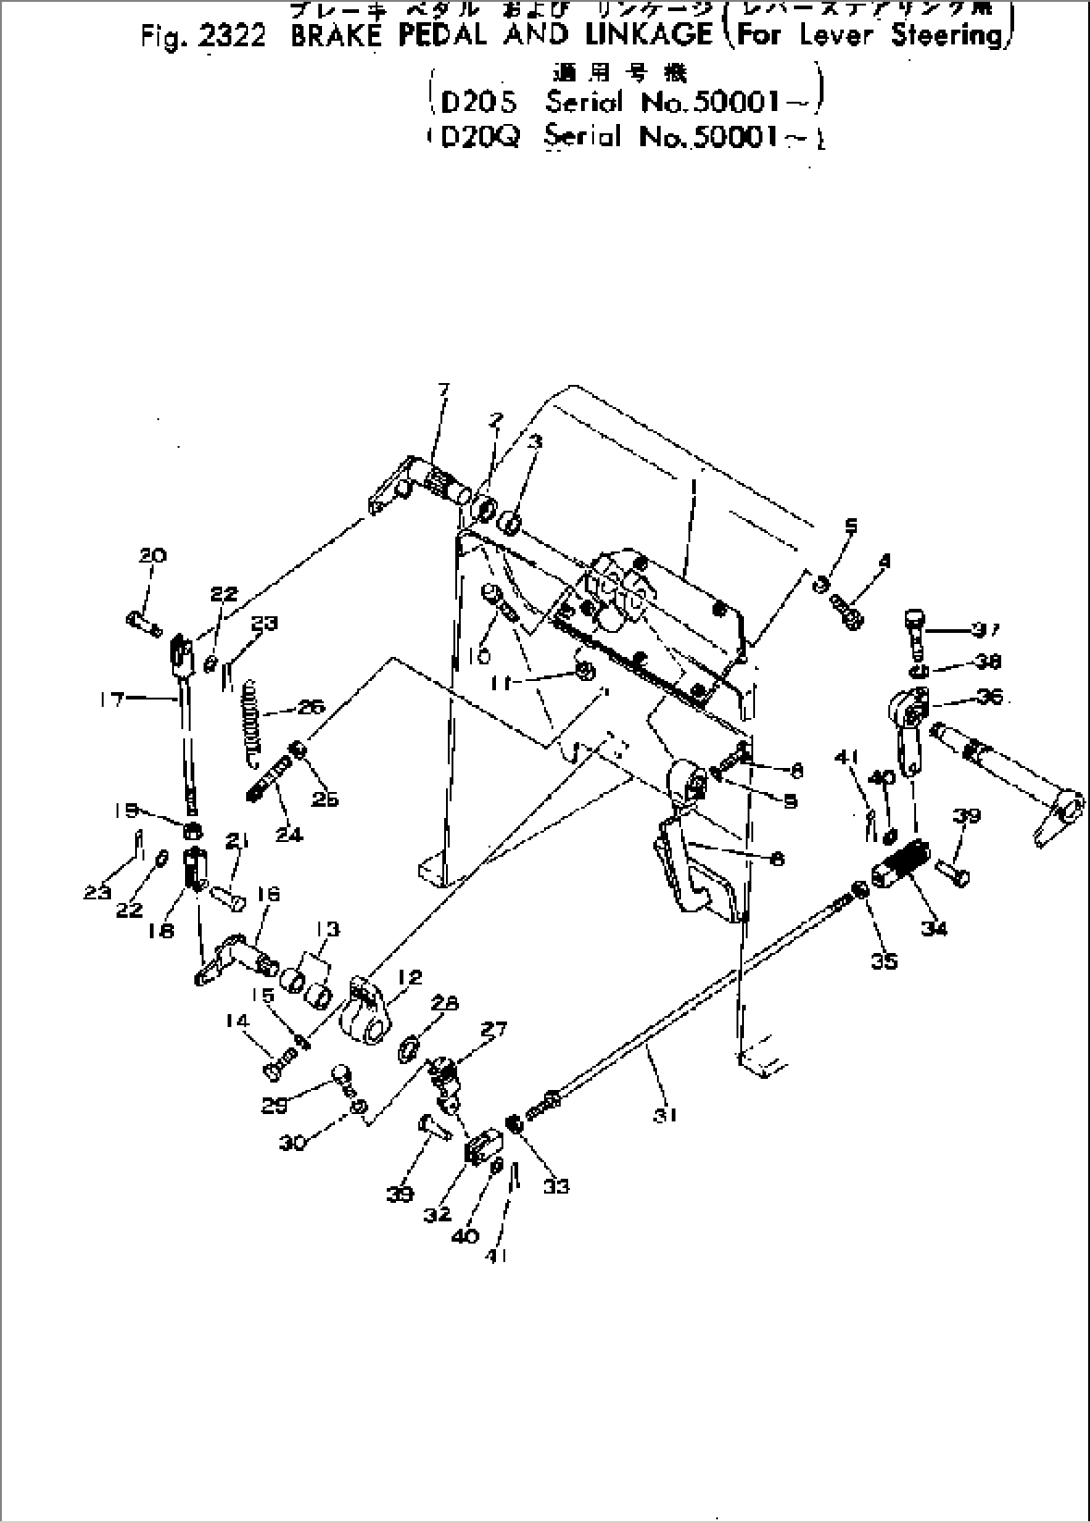 BRAKE PEDAL AND LINKAGE (FOR LEVER STEERING)(#50001-)